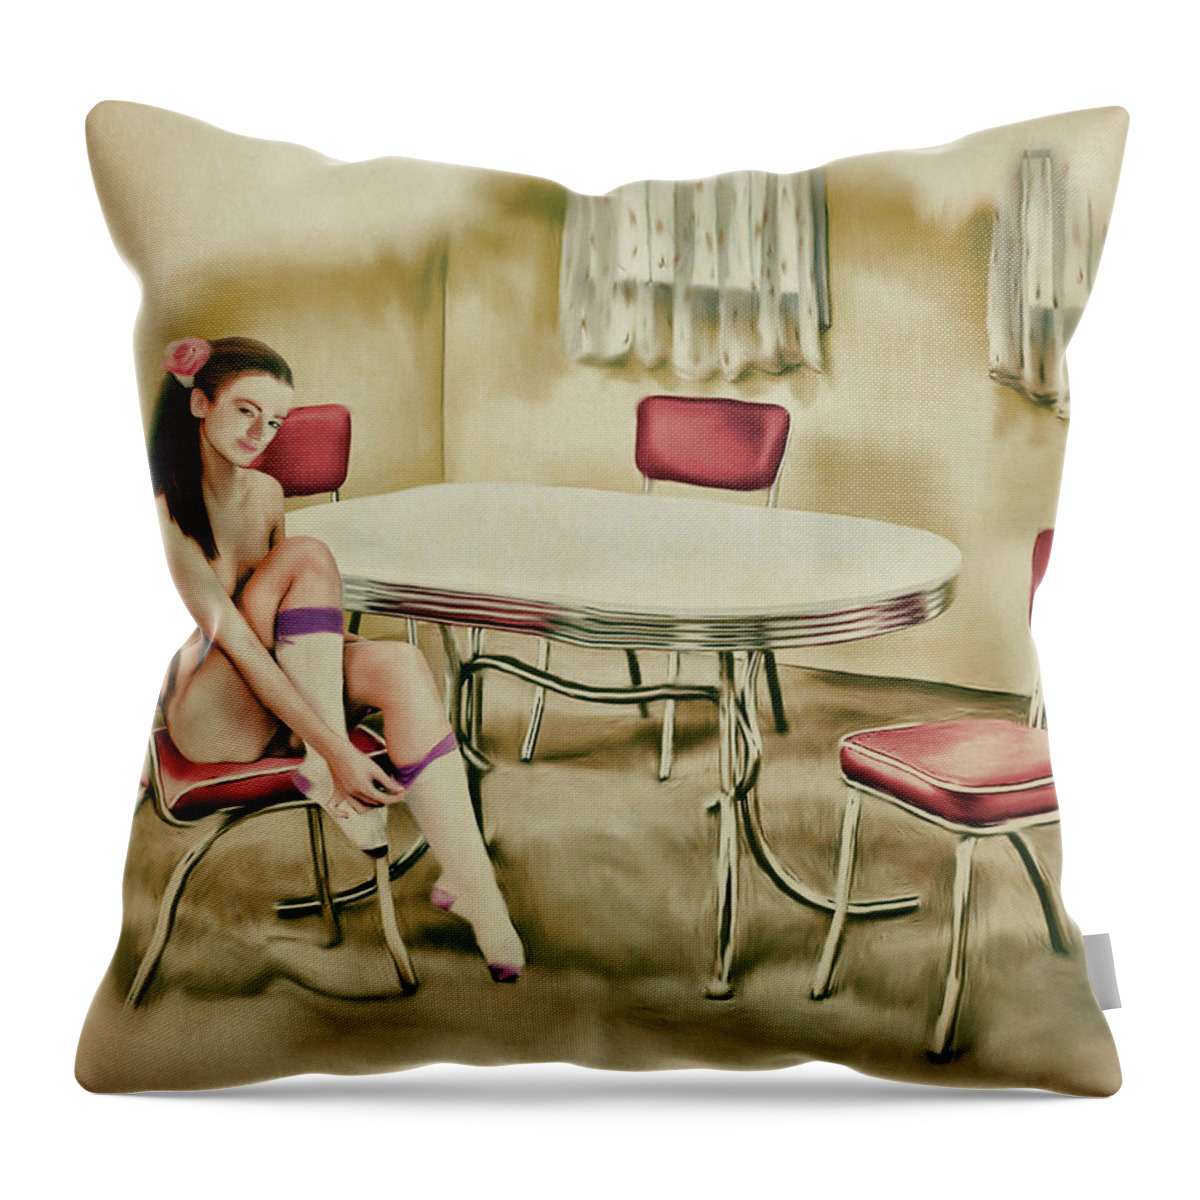 Salome Throw Pillow featuring the painting Saint Louis - Asian American Series by Salome Hooper